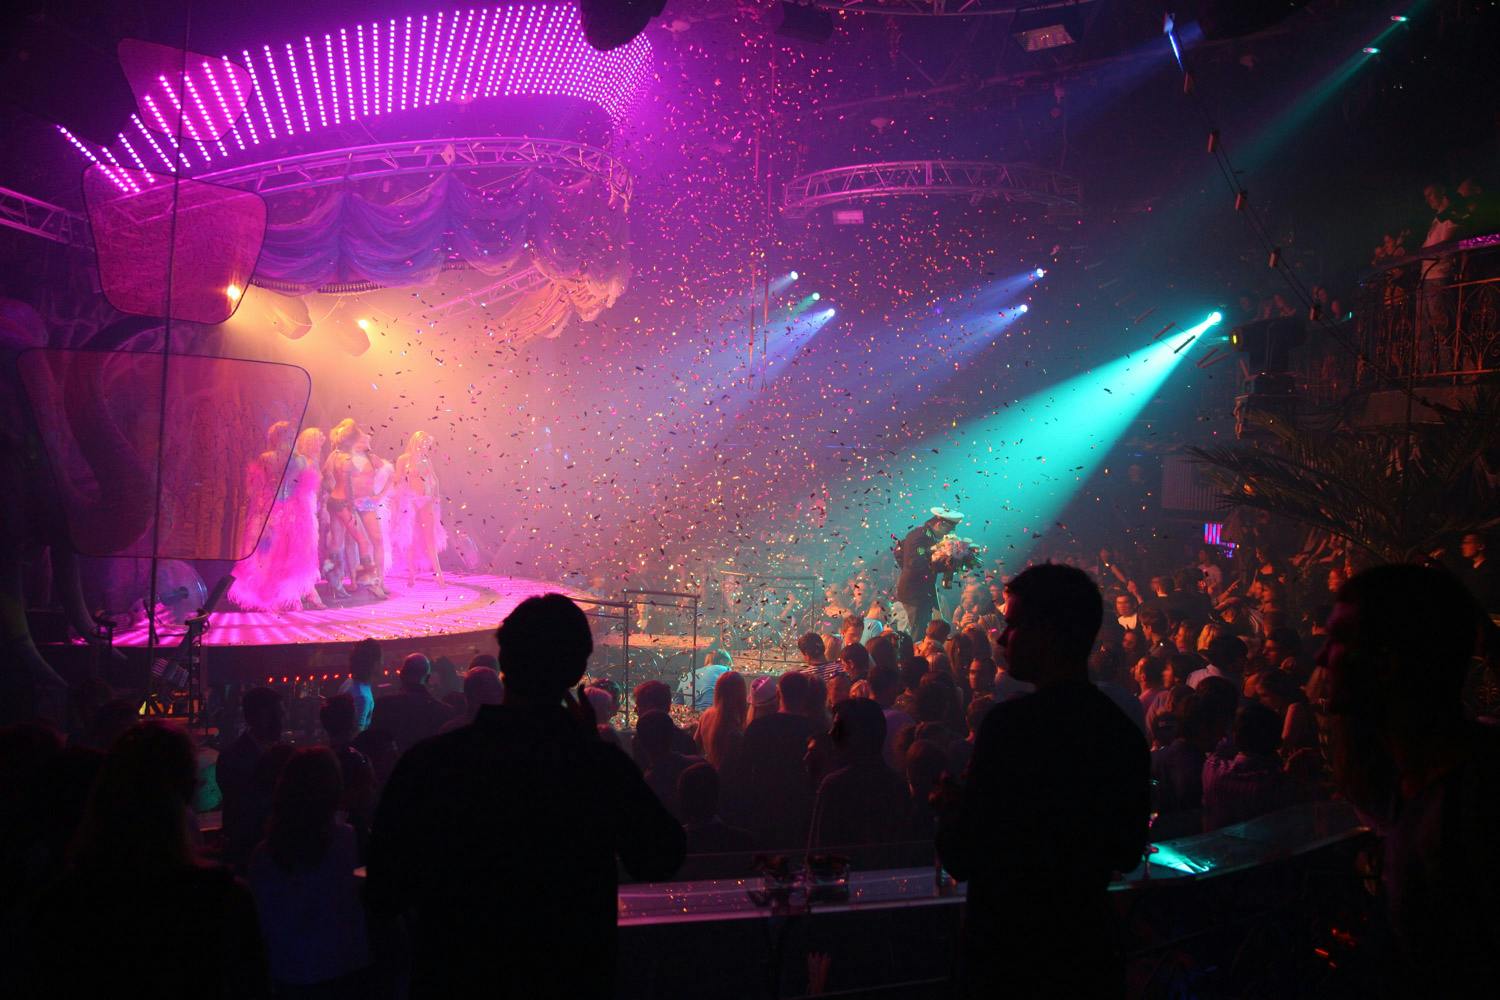 a small theatre event with pink and aqua lighting and confetti